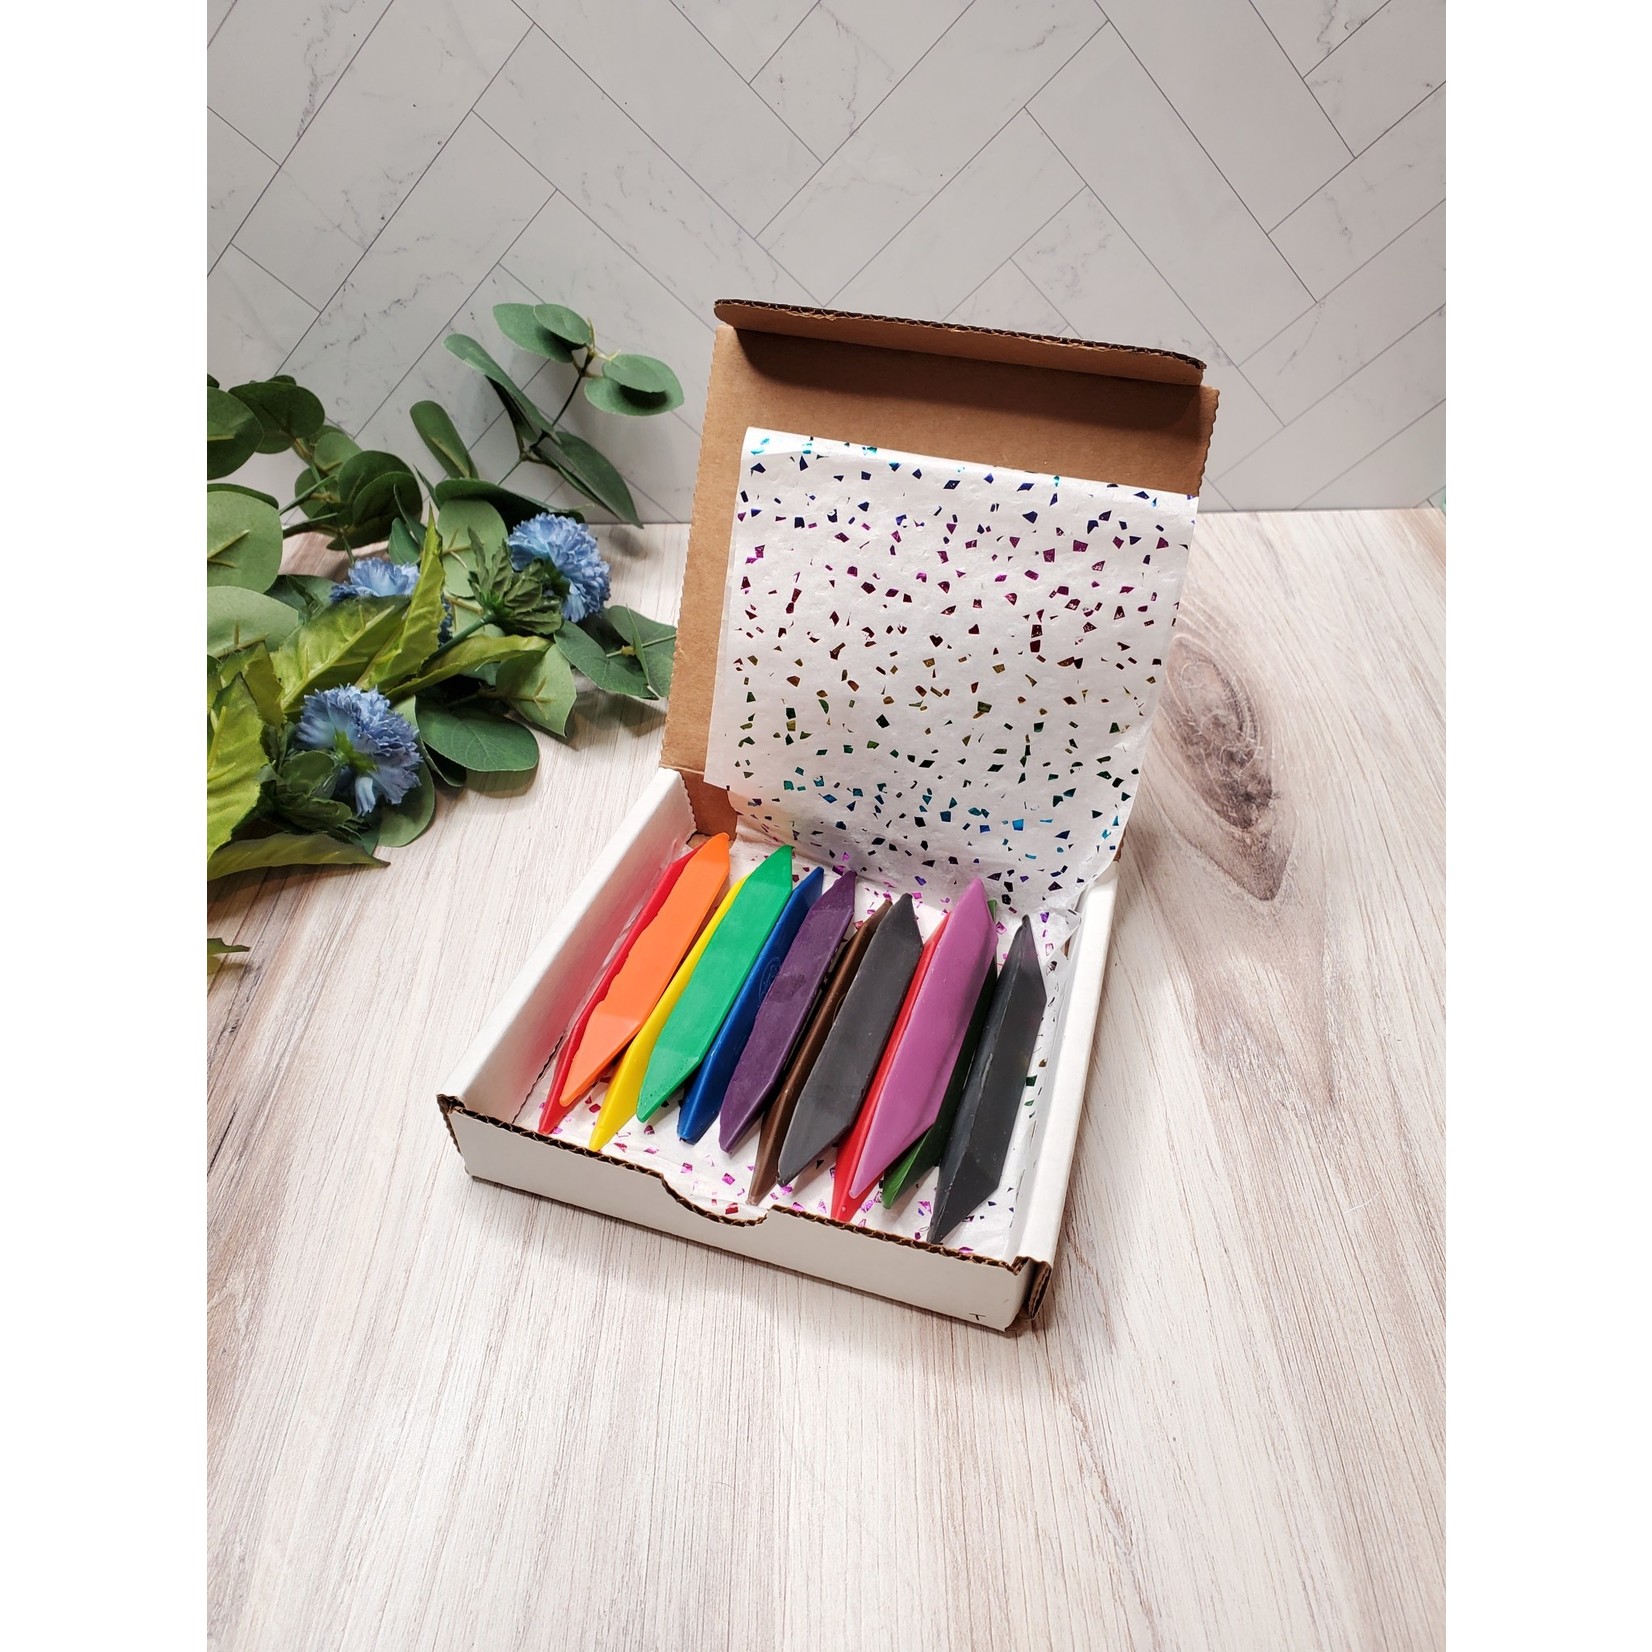 Tahoe Color Creations Beeswax Crayon Multi Pack - 12 color triangles